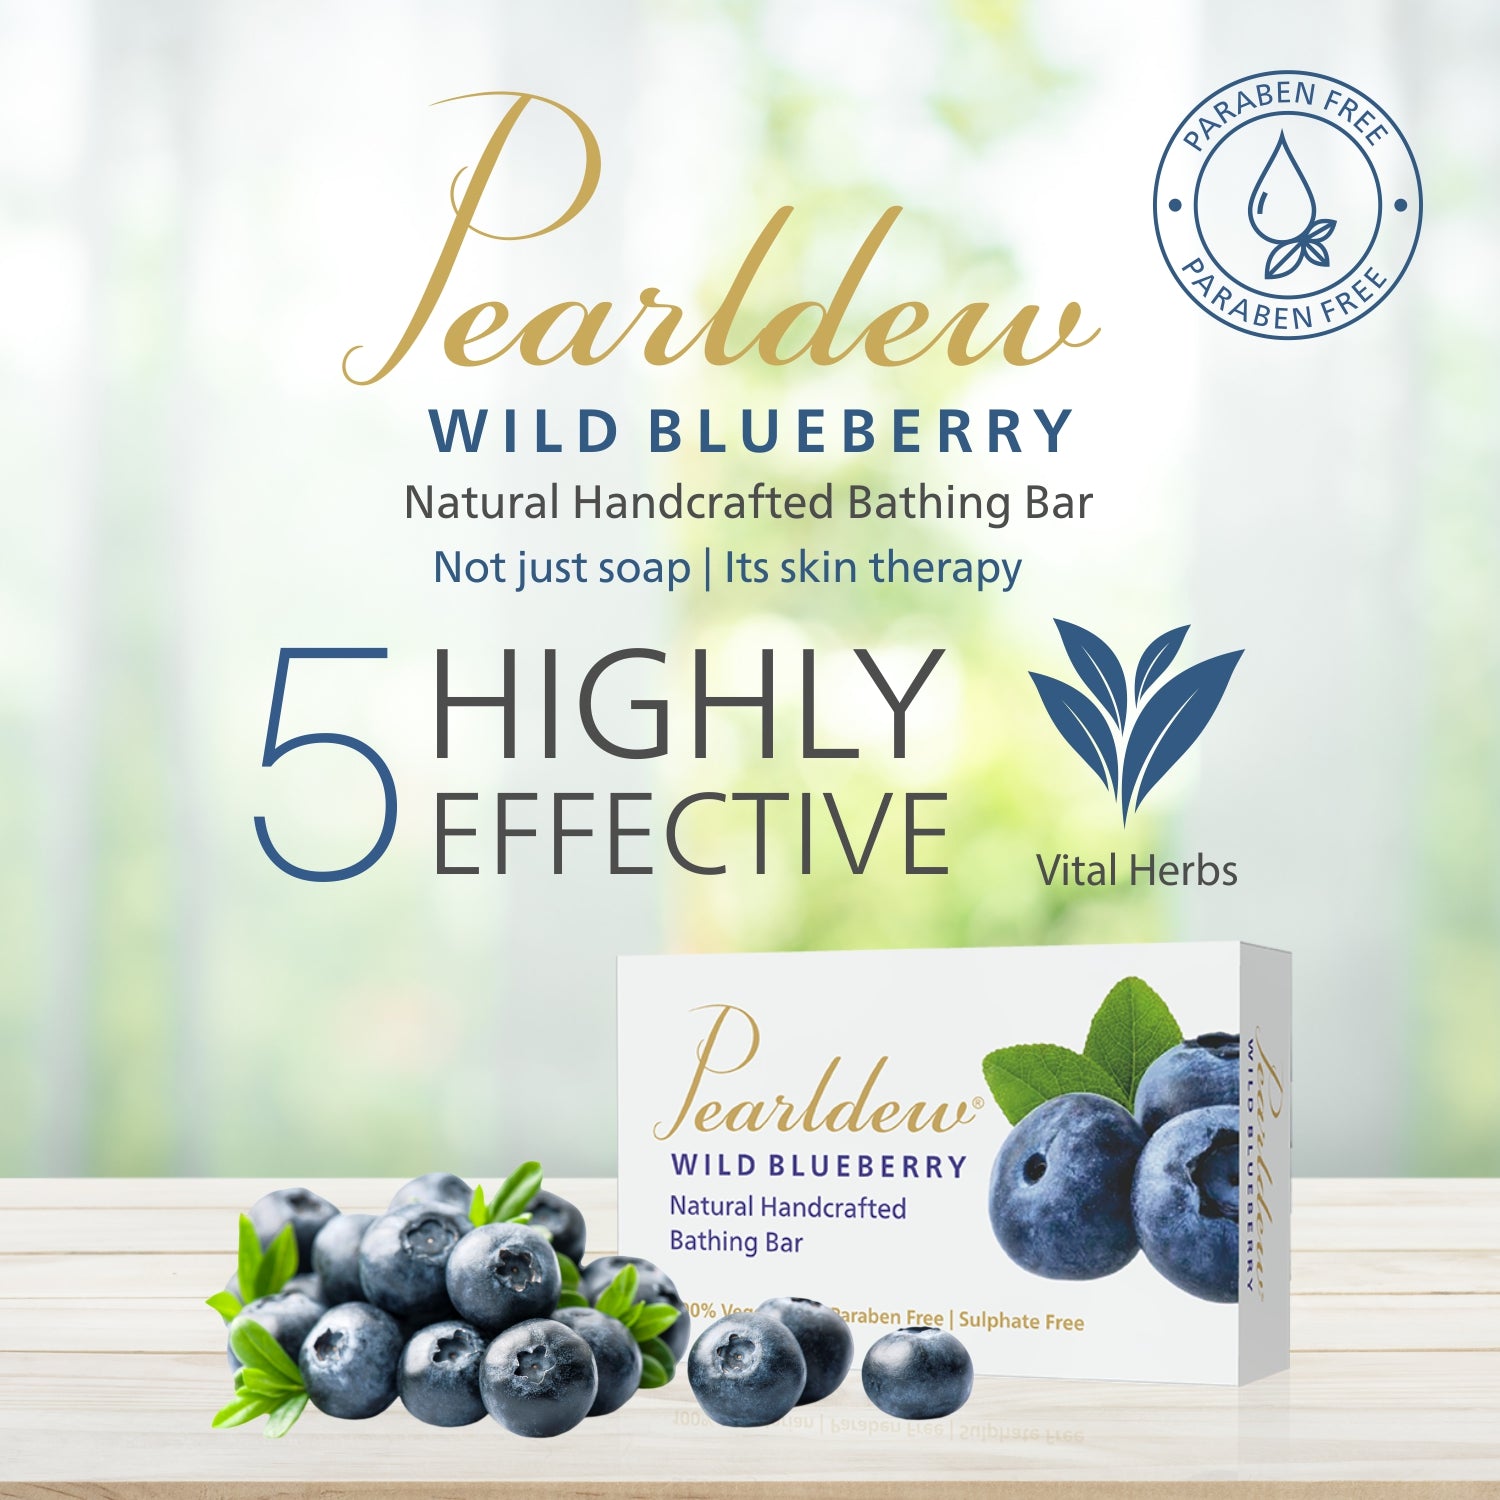 Pearldew Wild Blueberry Natural Handcrafted Bathing Bar (75 gm)